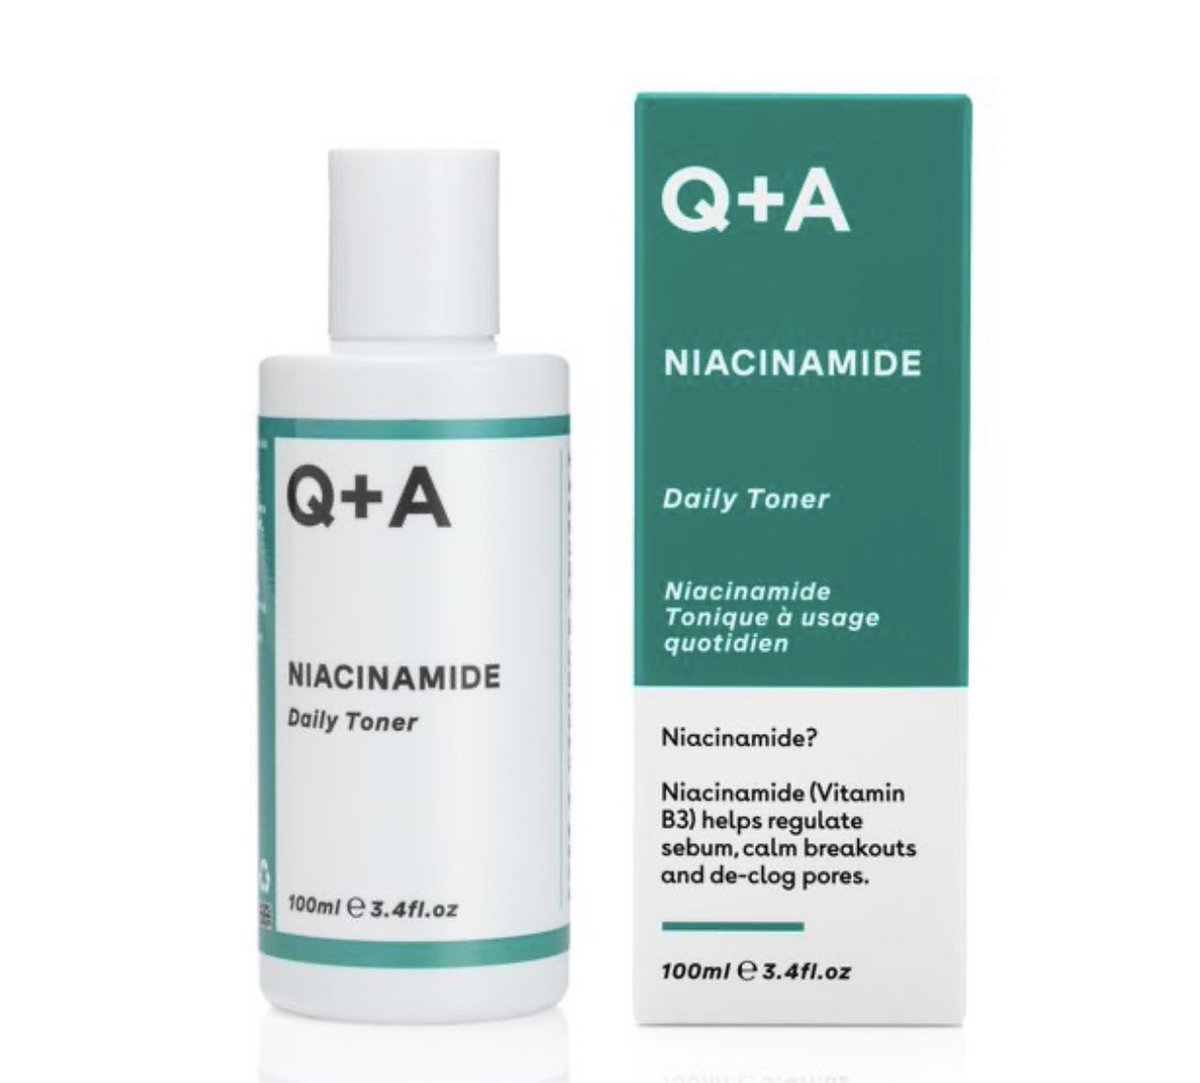 Q+A Niacinamide (vitamin B3) is great for pigmentation issues and helps clear up blemishes, inflammation, acne and uneven skin tone. RRP £8